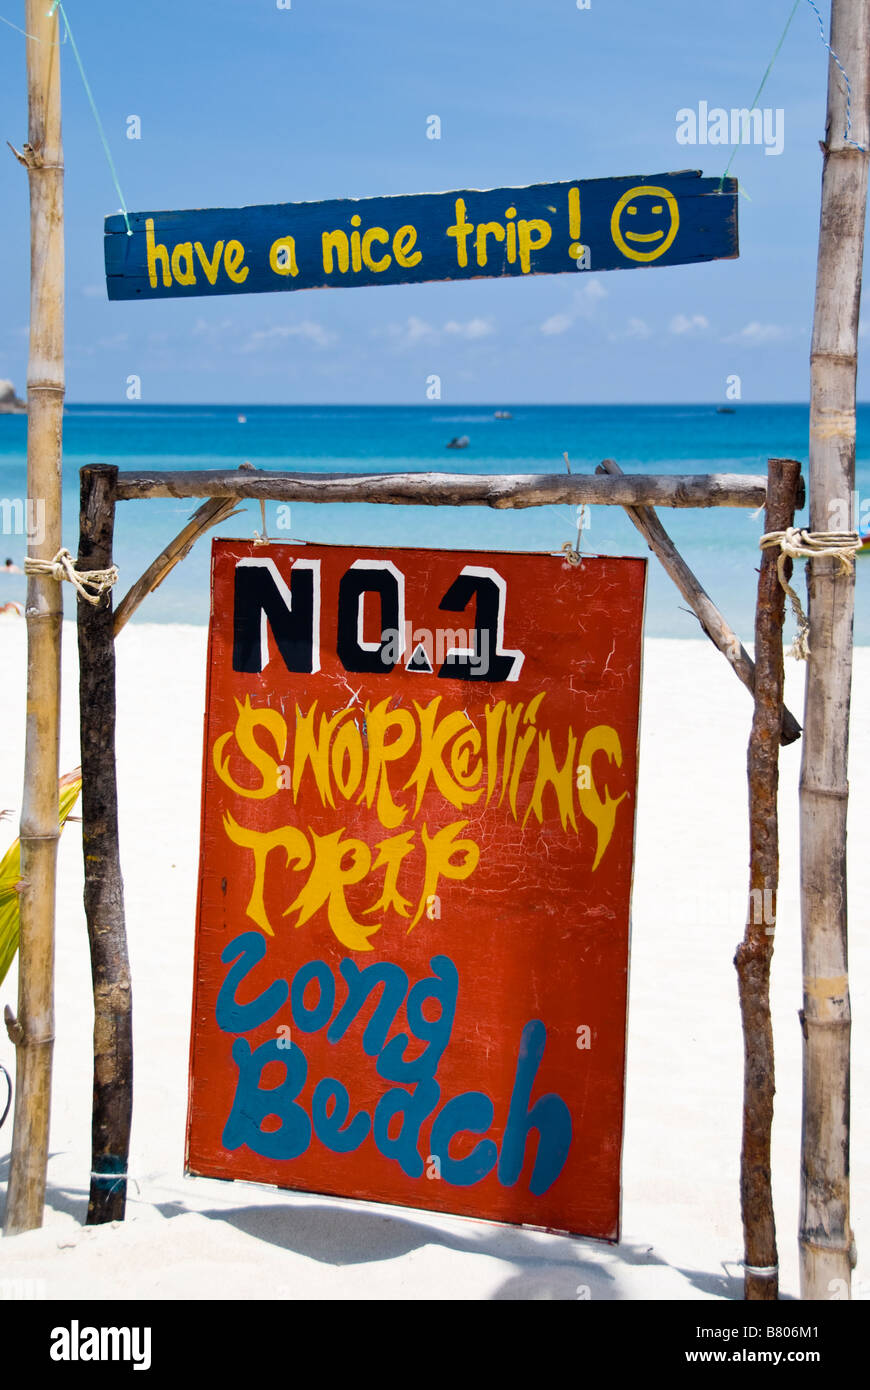 Sign advertising snorkeling trips from Long Beach on Perhentian Kecil, Malaysia Stock Photo